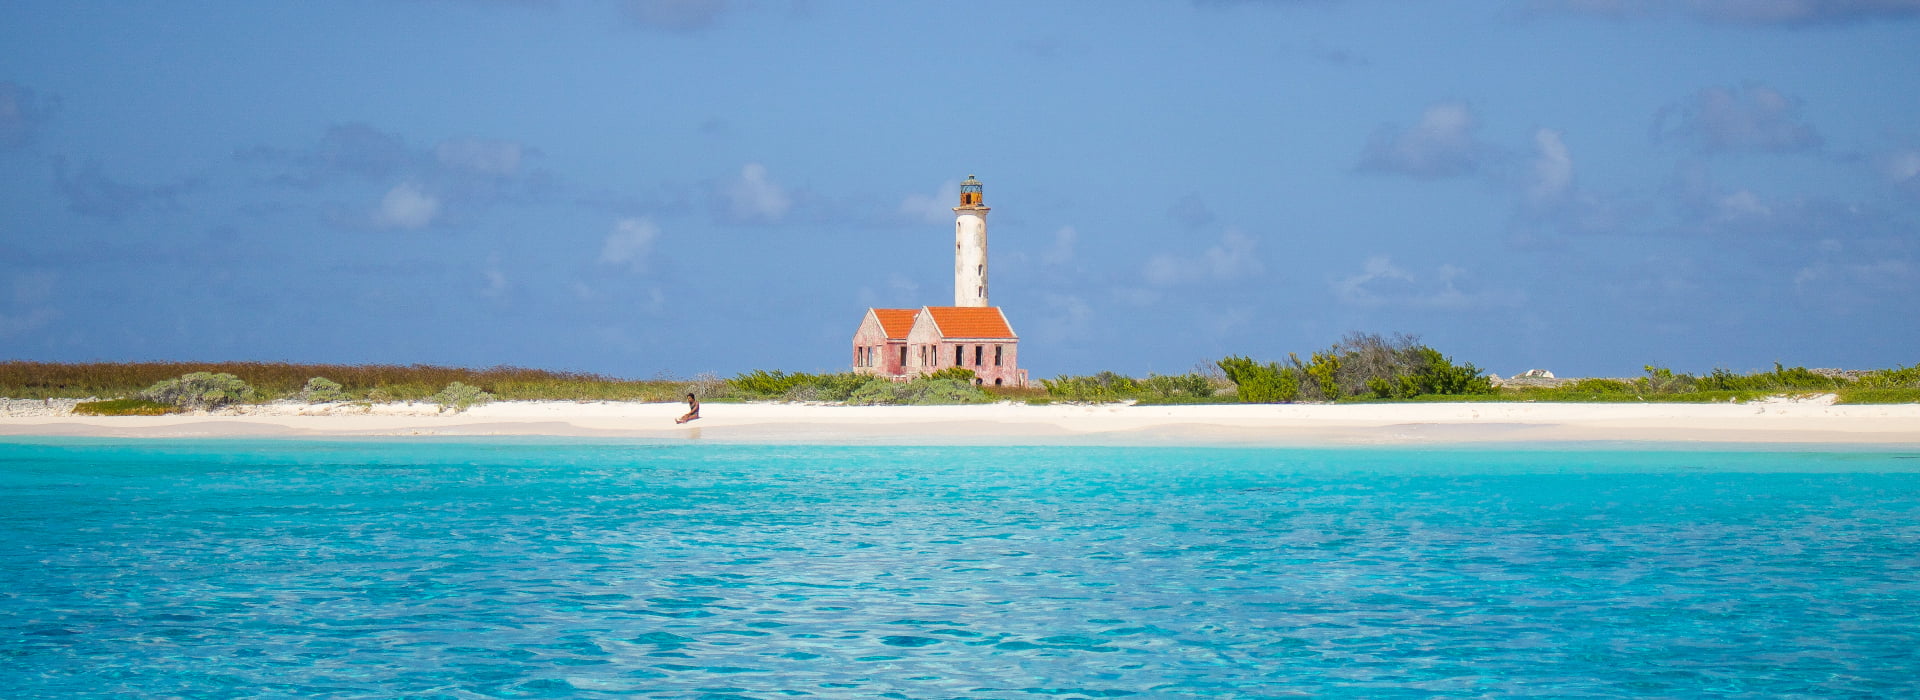 Lighthouse Klein Curacao with mermaid boat trips